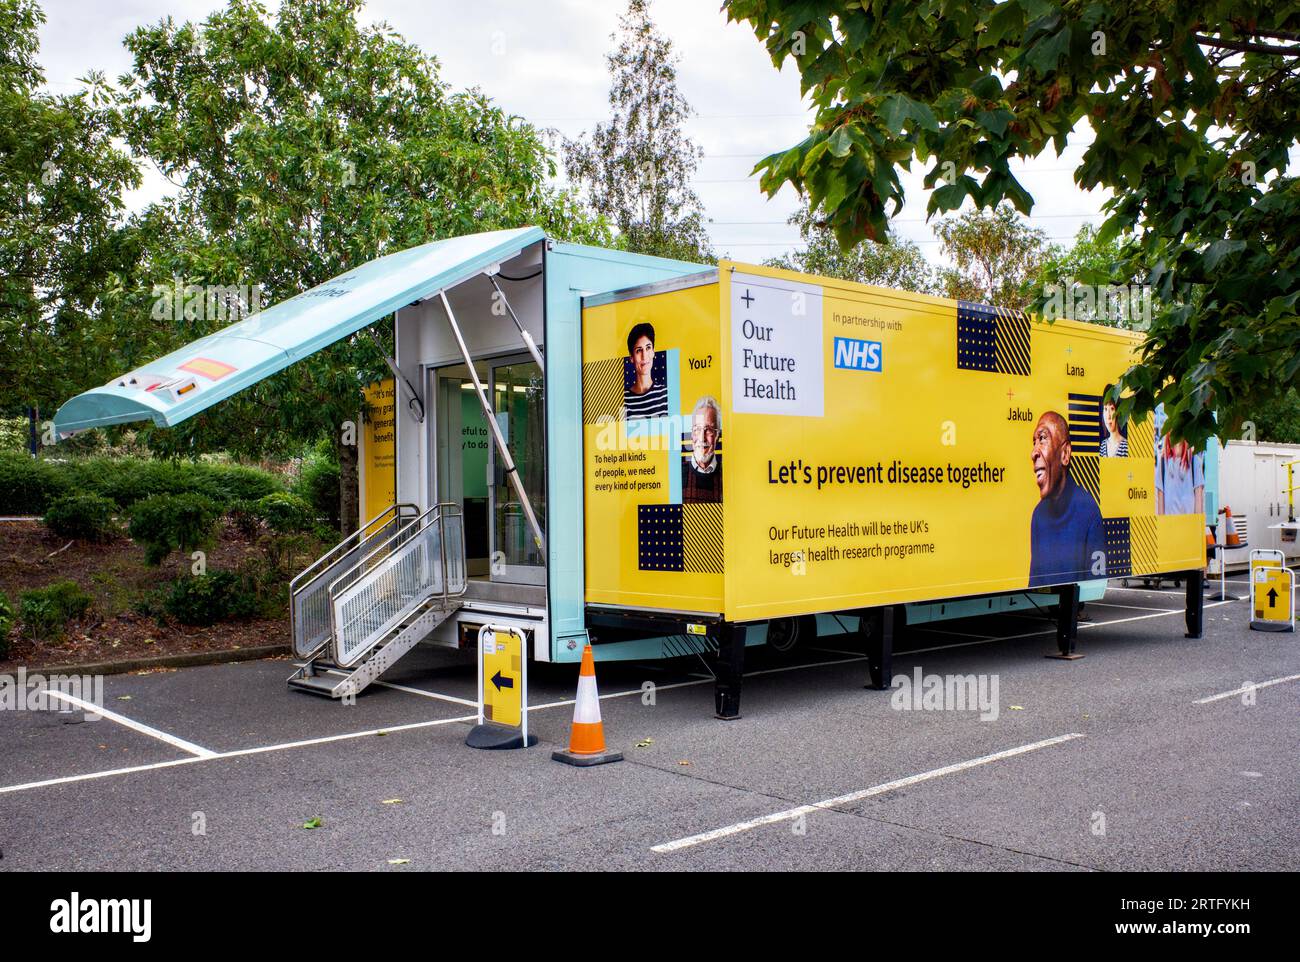 Notre clinique mobile future Health, parking Tesco, Lower High Street, Watford, Hertfordshire, Angleterre, Royaume-Uni Banque D'Images